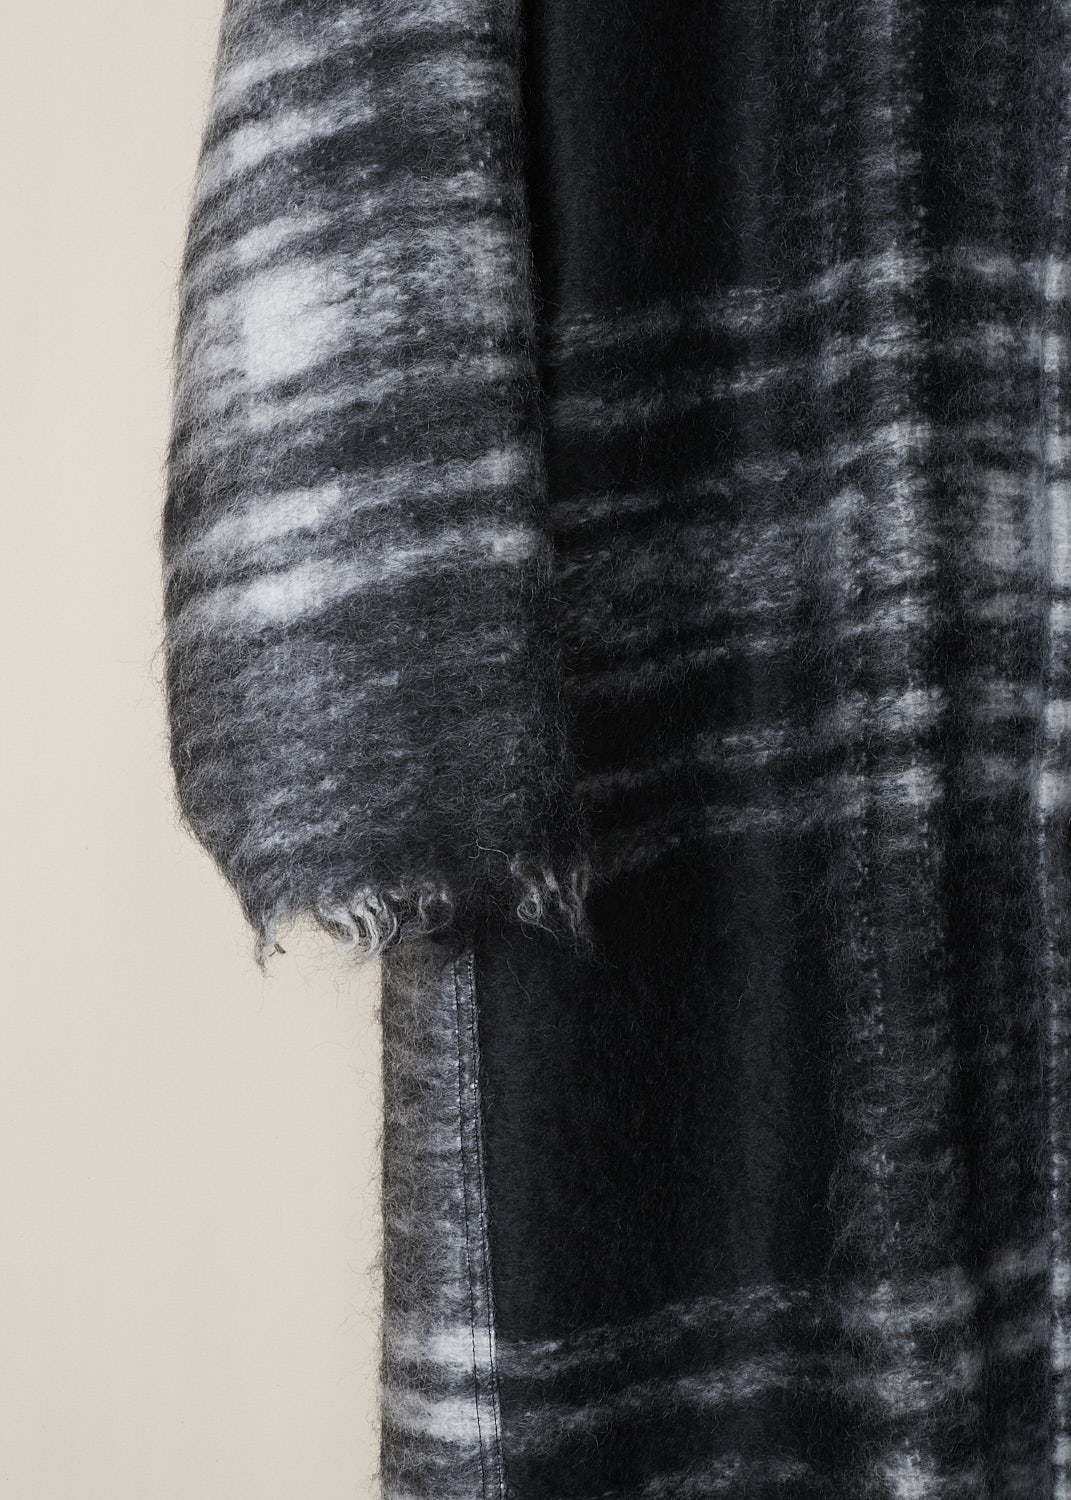 SOFIE Dâ€™HOORE, LONG BLACK AND WHITE TARTAN CAY COAT, CAY_WOMO_BLACK_TARTAN, Black, White, Print, Detail 1, This long black and white tartan Cay coat has a spread collar and a front button closure. The long sleeves have slightly dropped shoulders and a raw edged cuff. In the front, the coat has on-seam slanted pockets. The coat has a straight raw edged hemline. The coat is fully lined and has a single inner pocket. 
